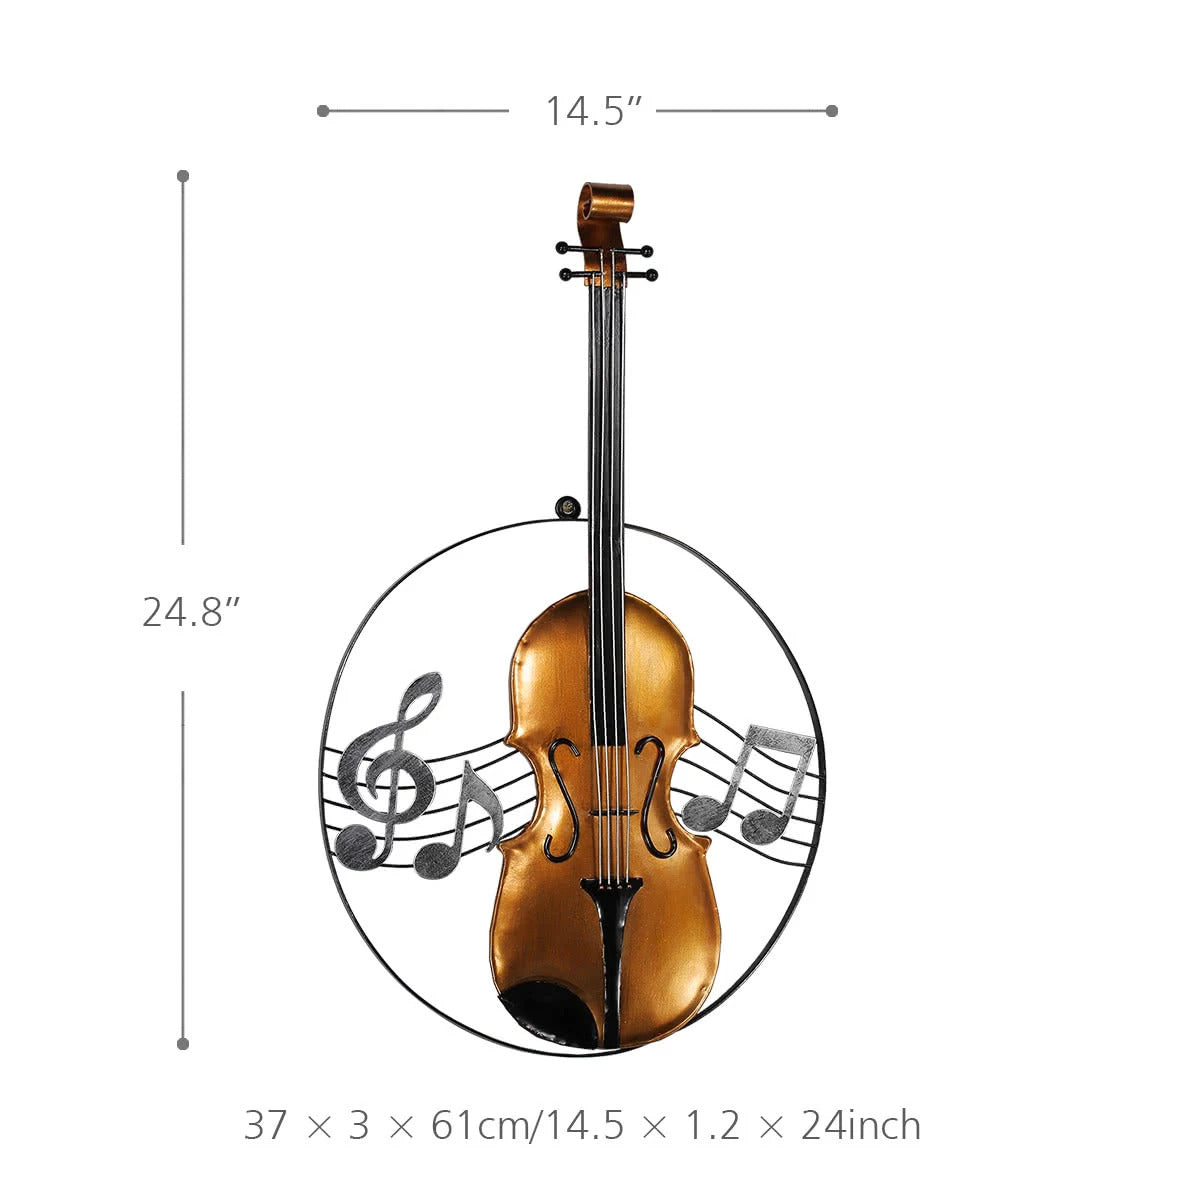 Musical Instrument Wall Art with Violin